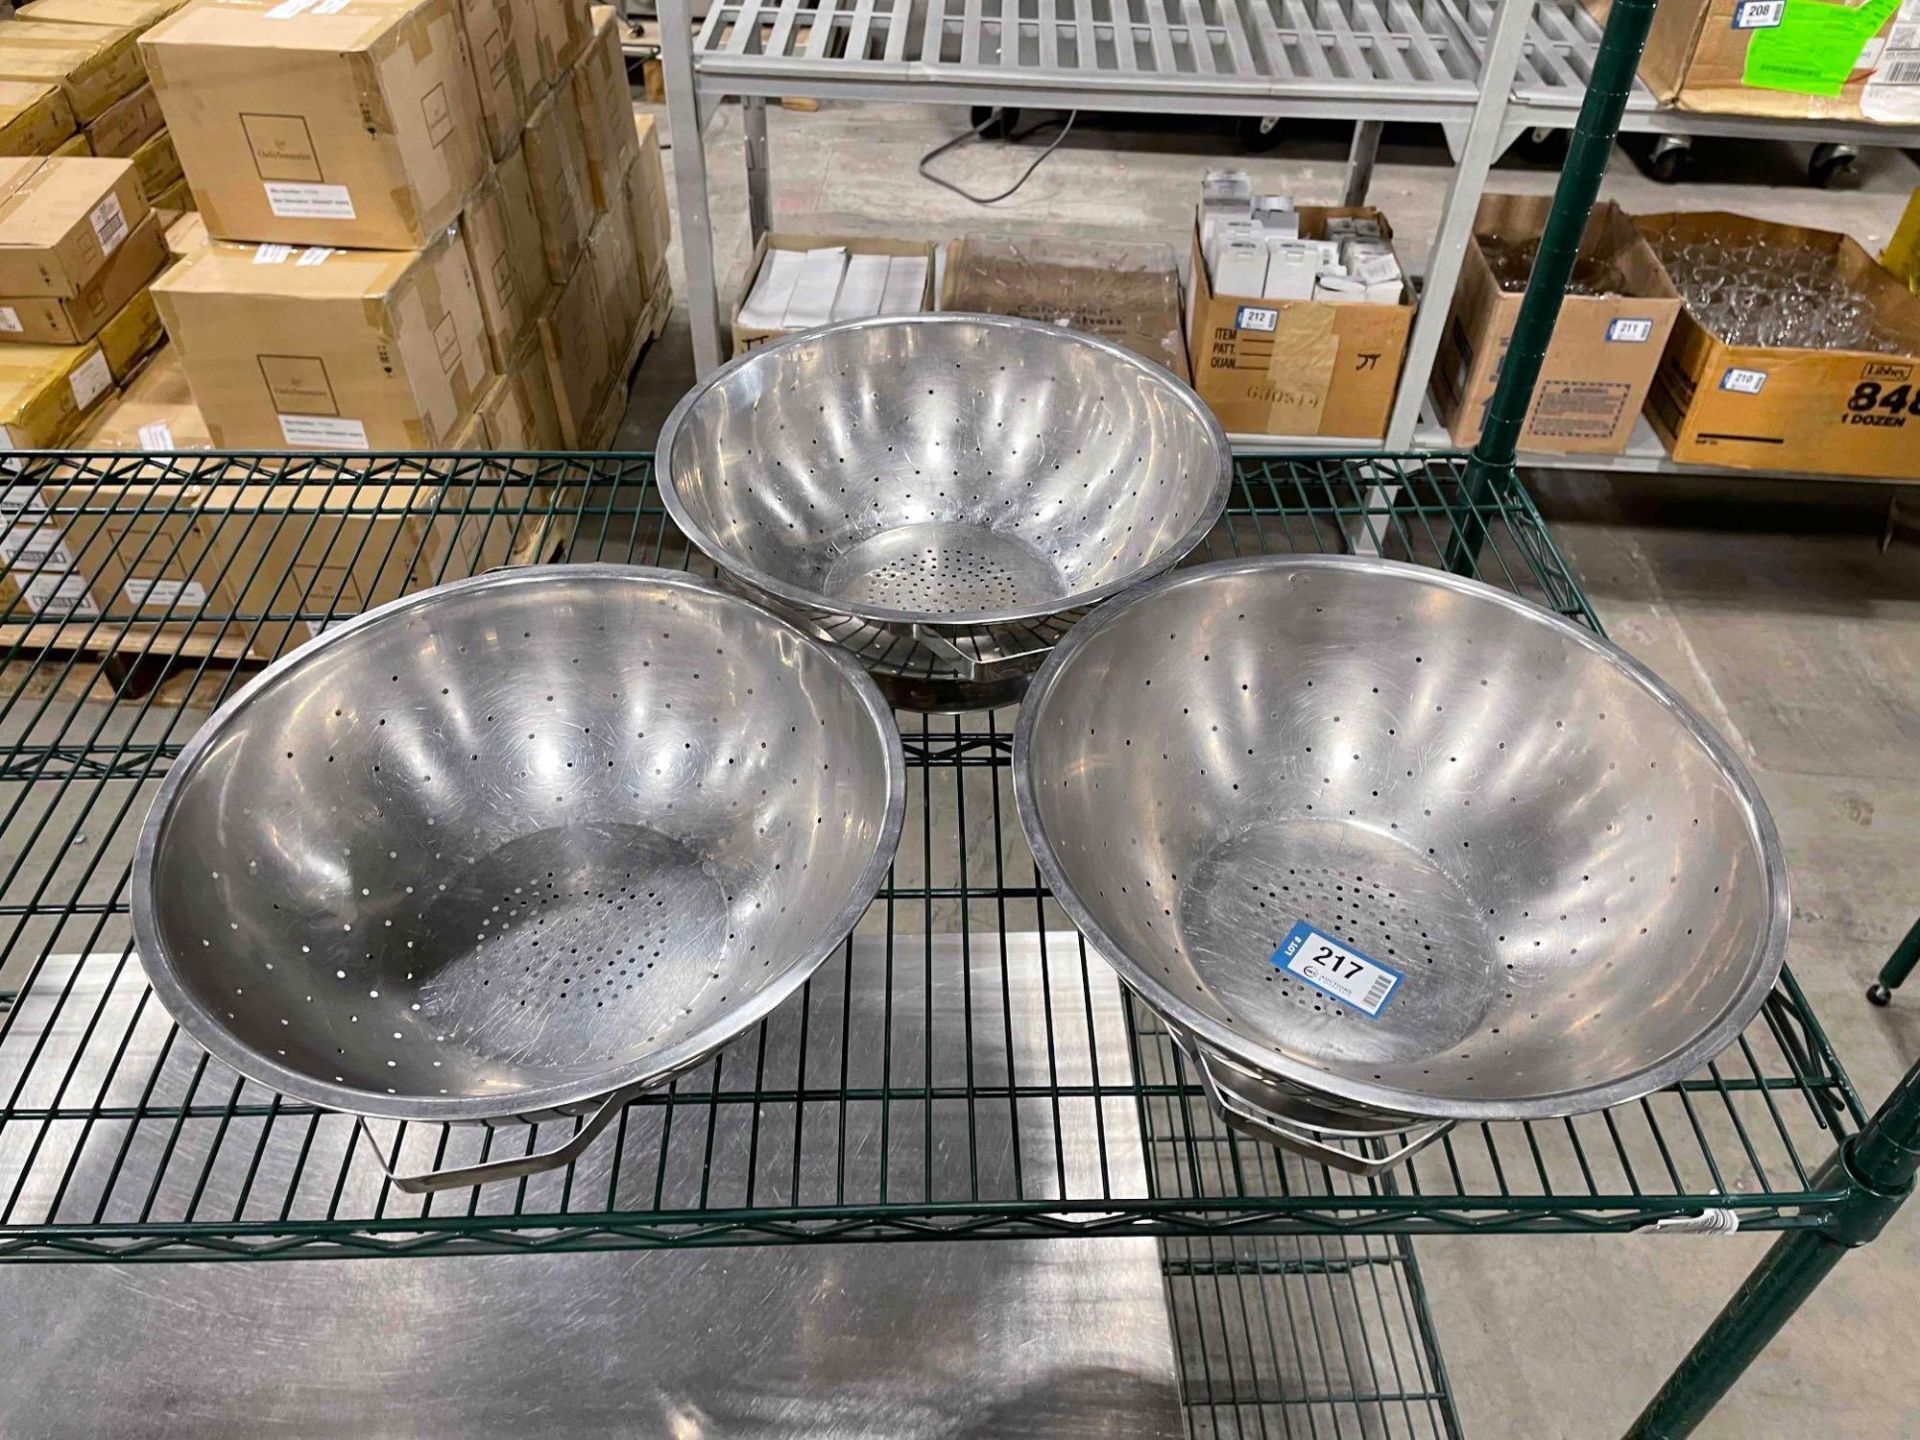 (3) LARGE STAINLESS STEEL COLANDER